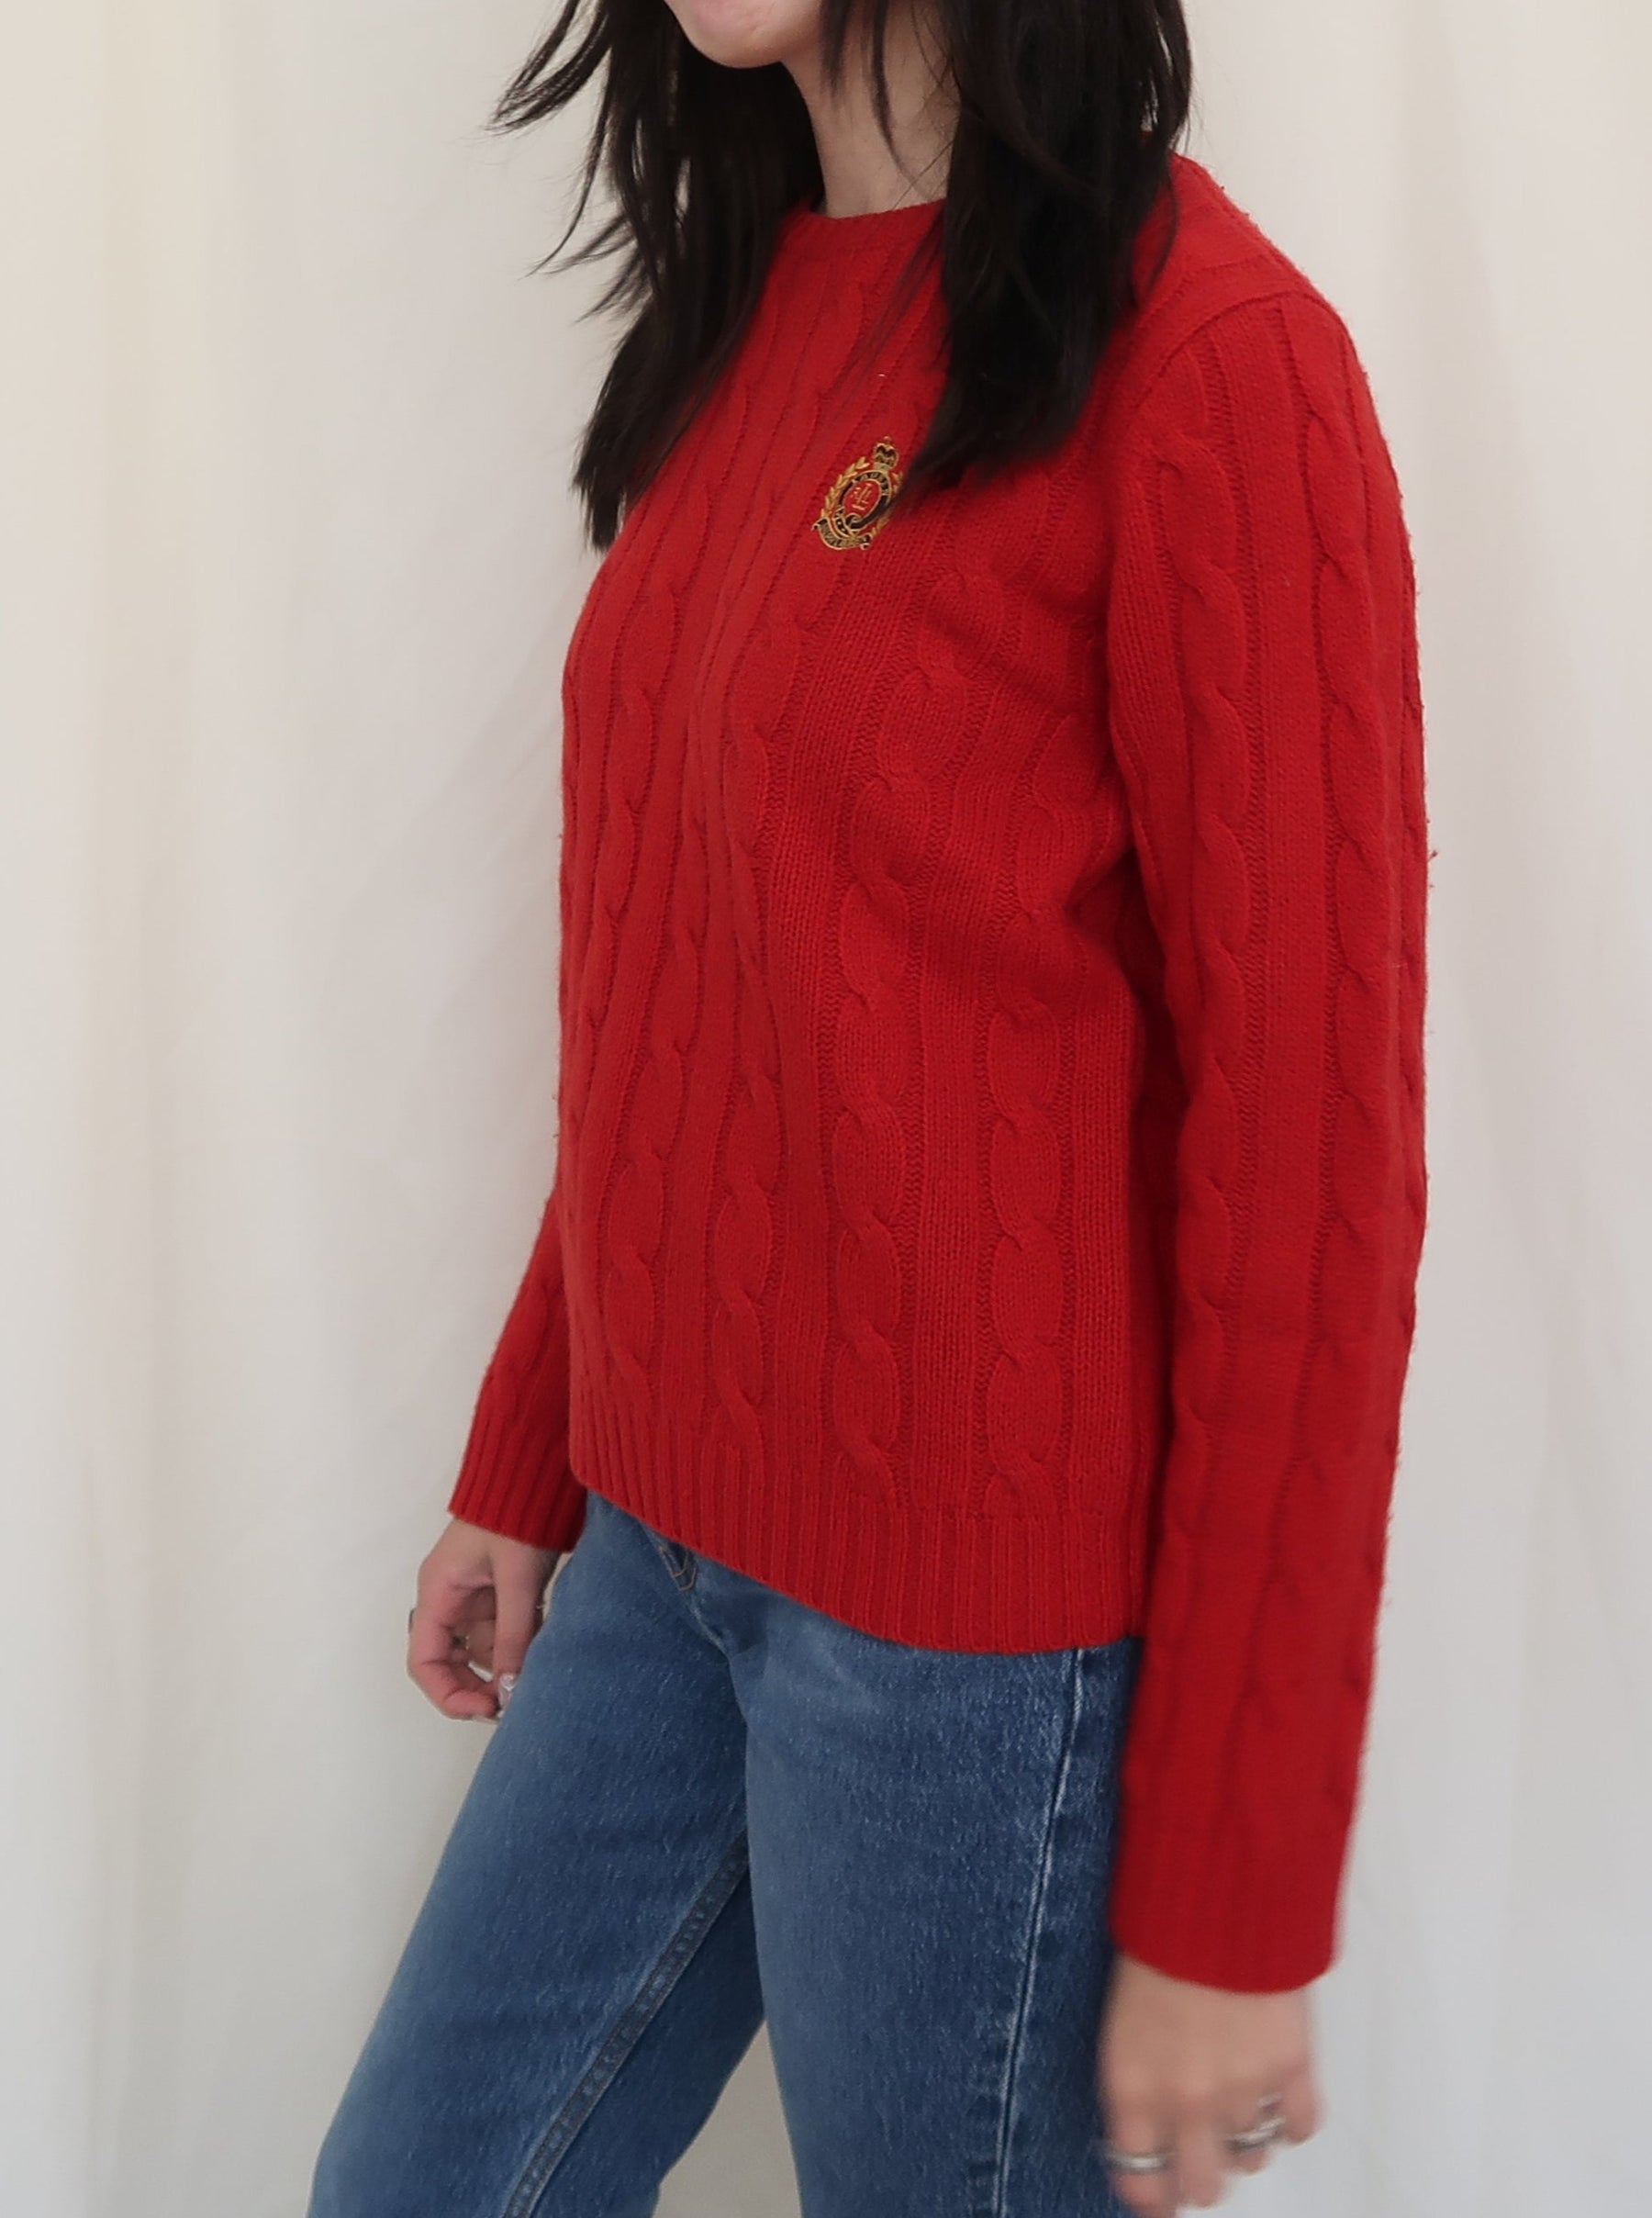 VINTAGE RALPH LAUREN CABLE KNIT RED SWEATER - (SMALL)